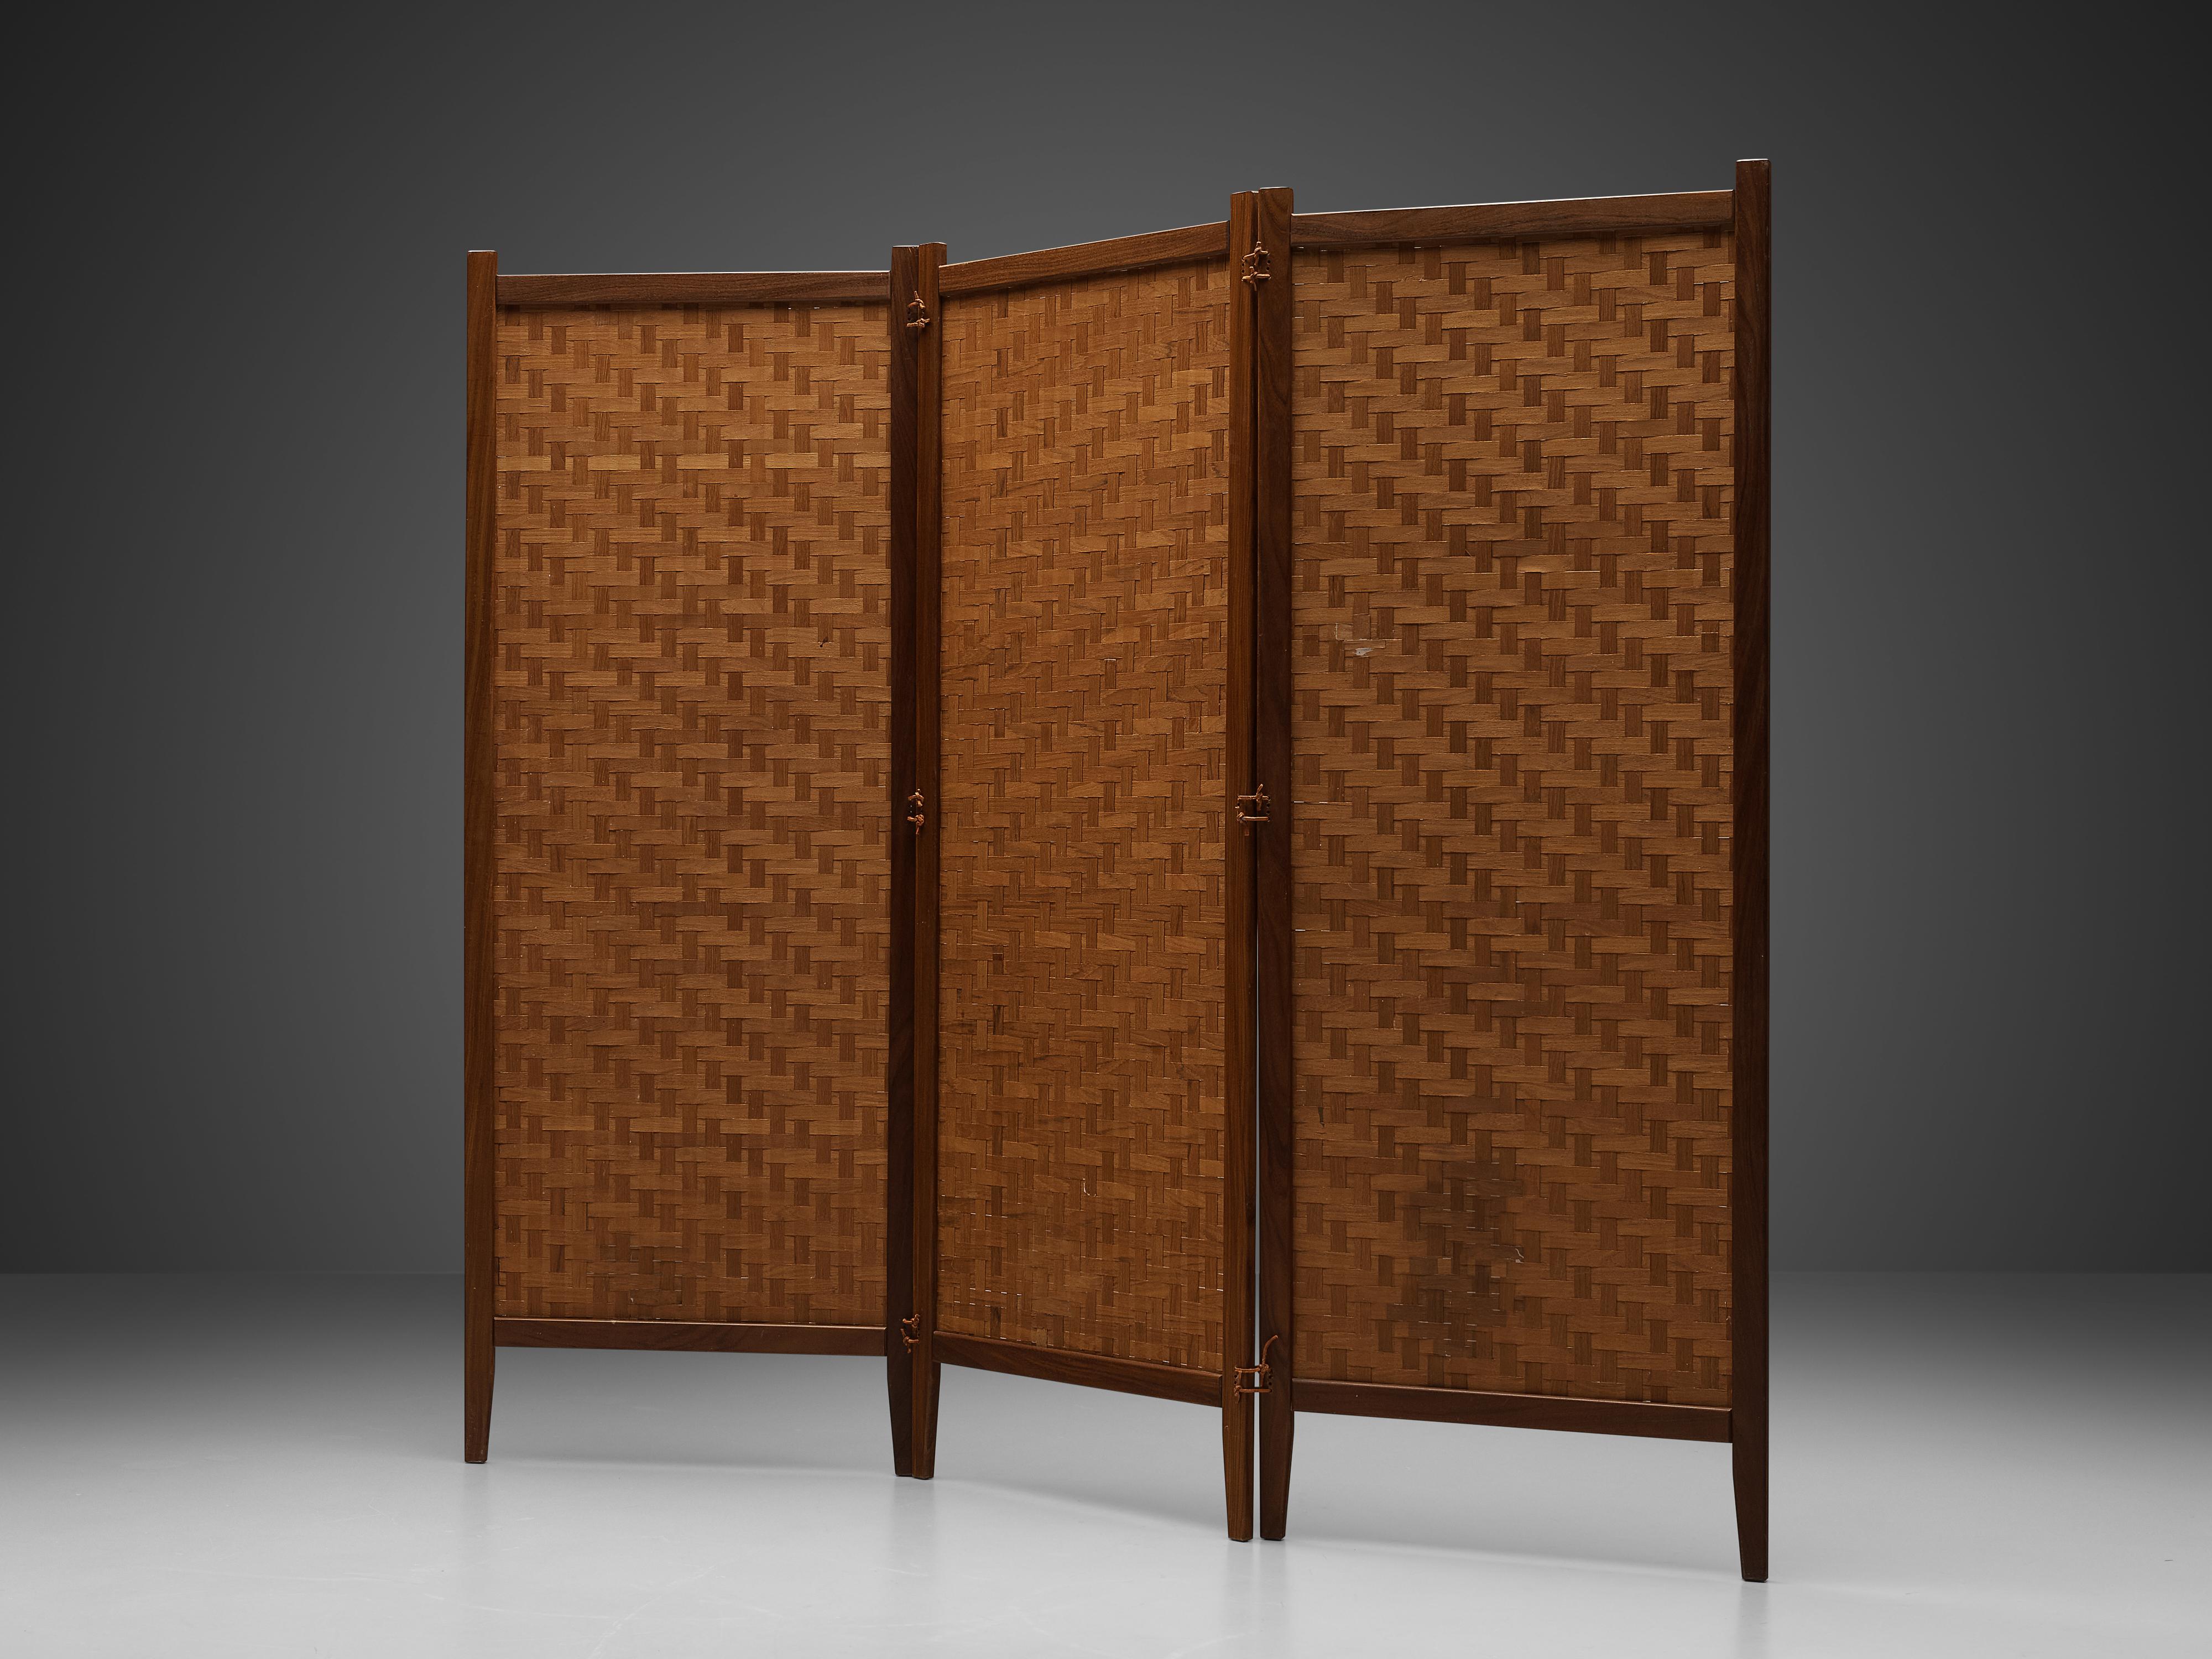 Albert Jansson for Alberts Tibro, room divider model 'Spana', mahogany, wooden straps, leather, Sweden, 1950s

Swedish folding screen or room divider with three panels designed by Albert Jansson for Alberts Tibro. A mahogany frame surrounds the